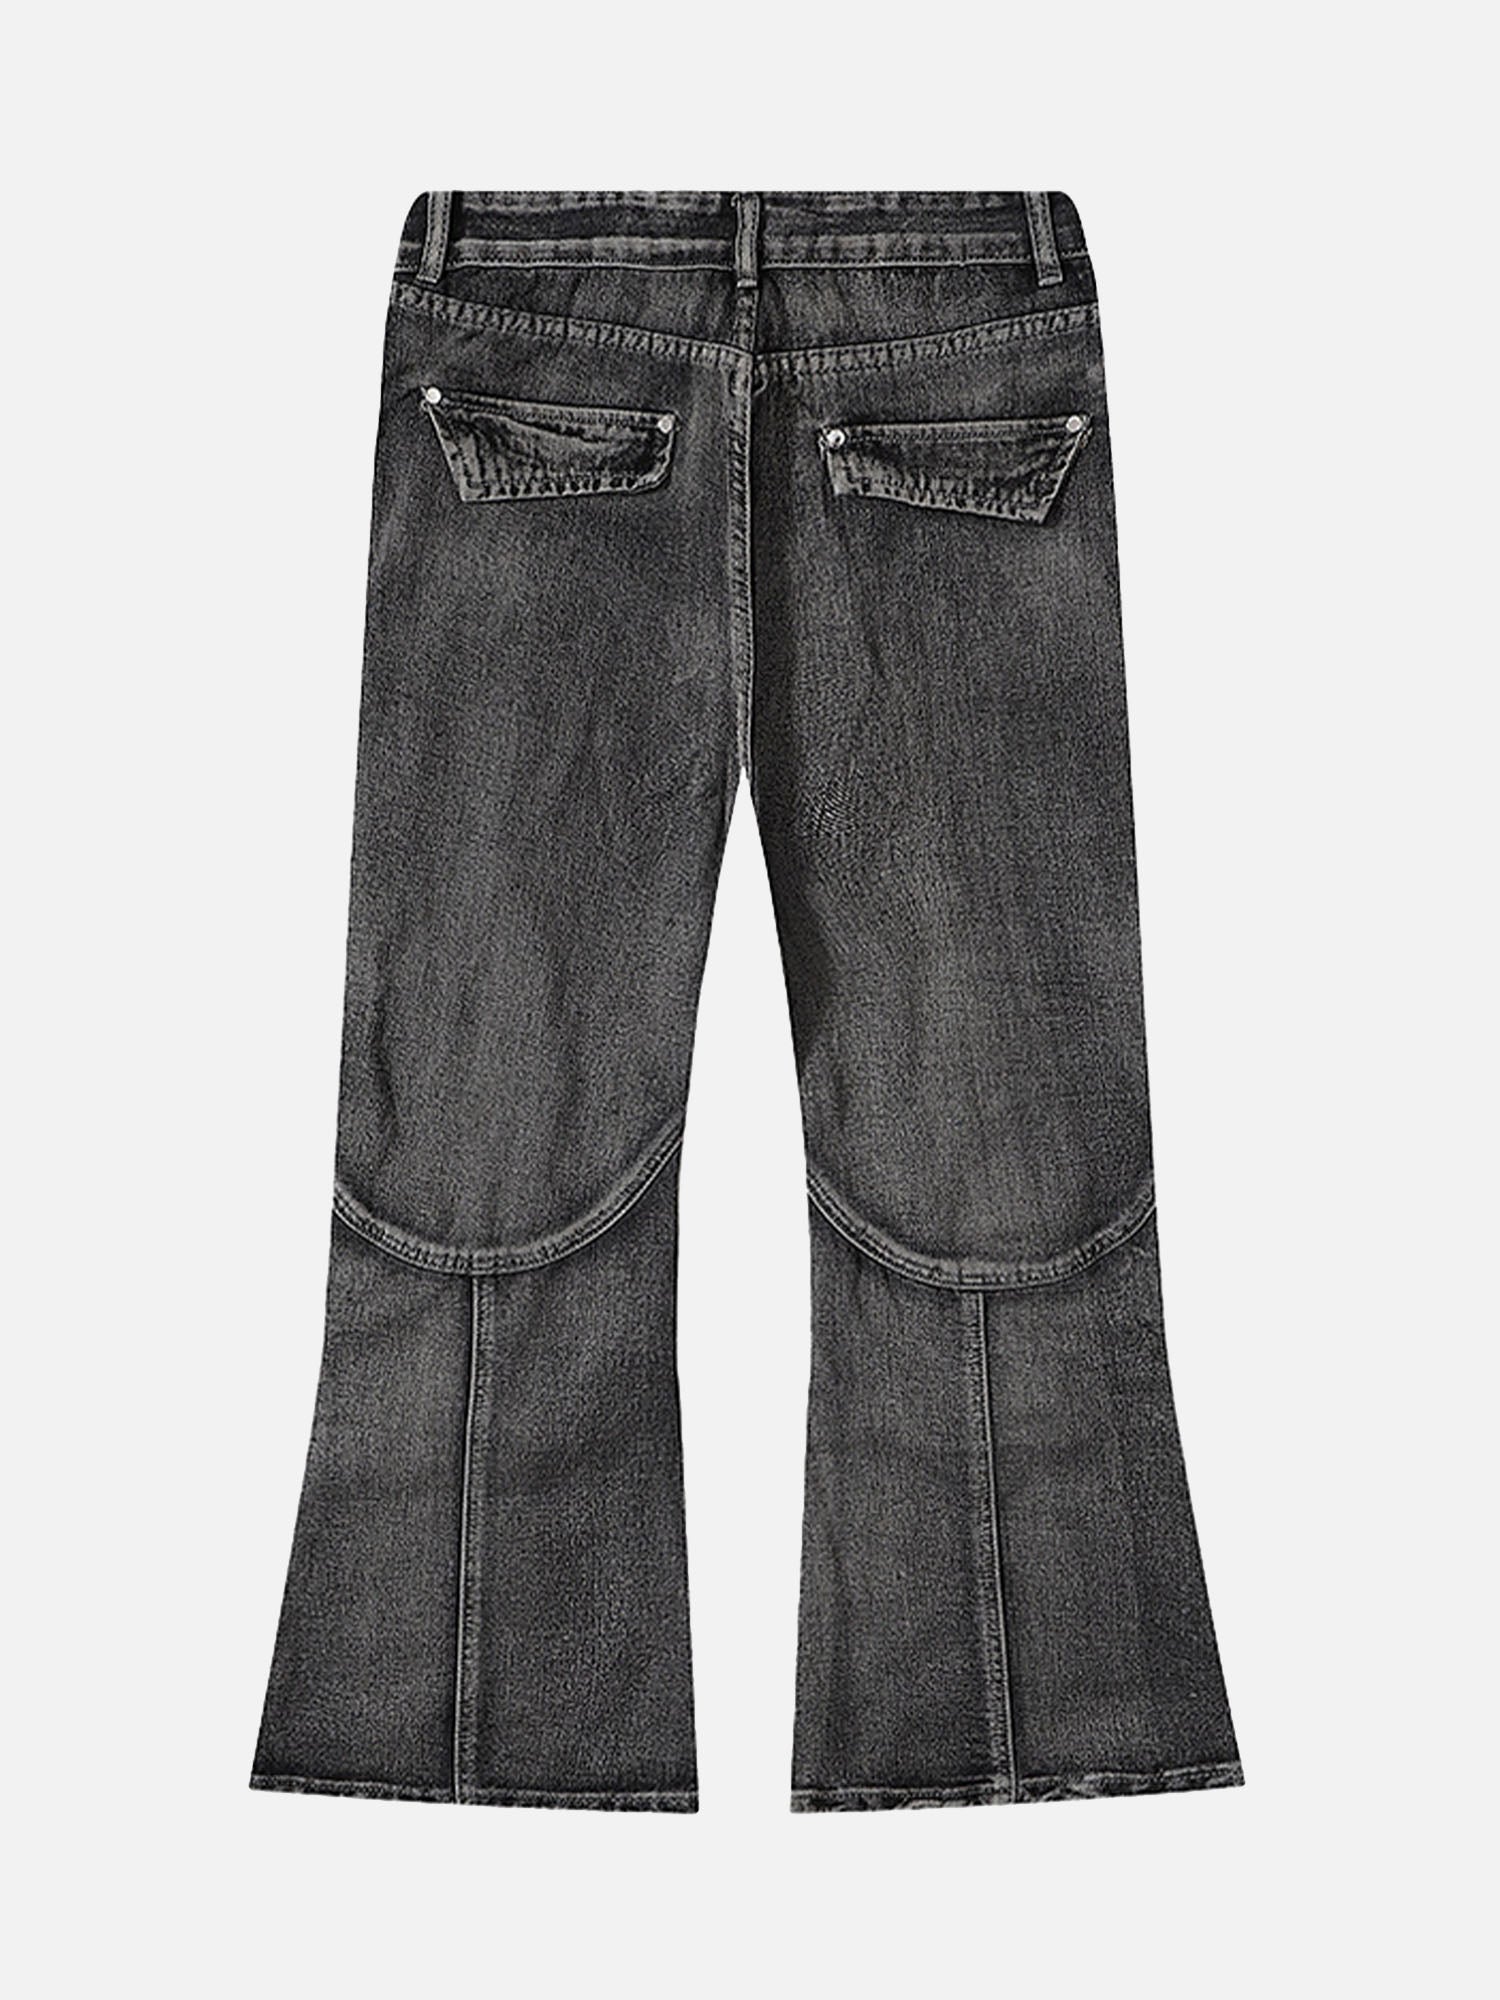 Wasteland Style Washed Distressed Pleated Micro-flare Jeans